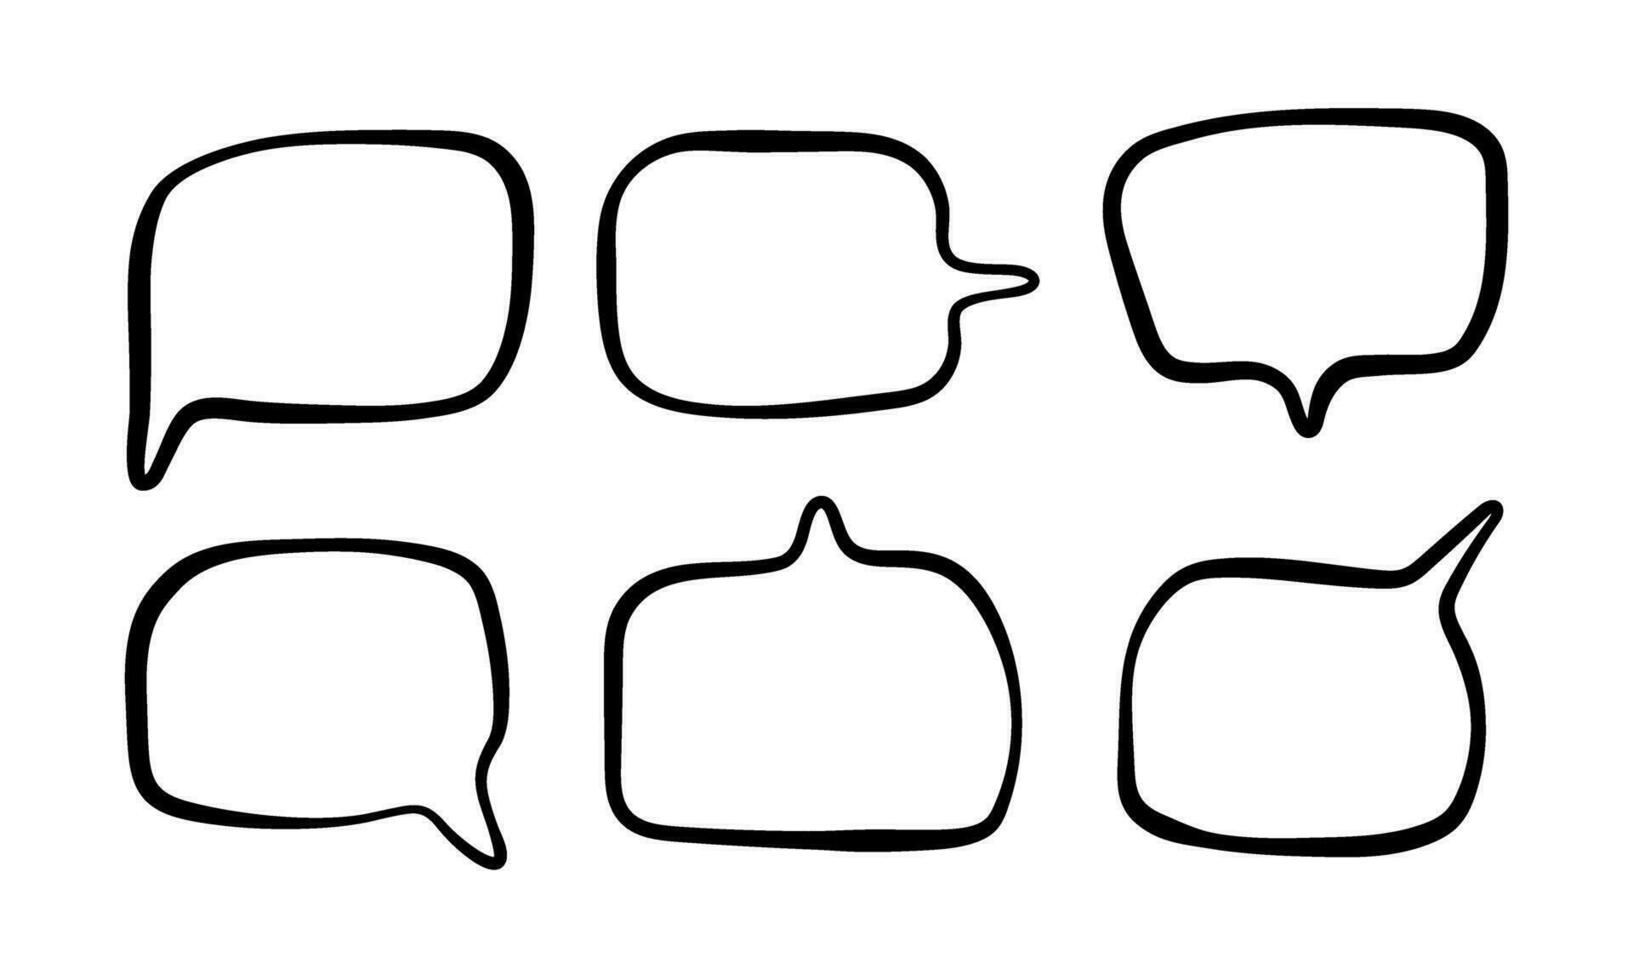 Set of empty Speech bubbles. Vector isolated doodle linear hand drawn illustration